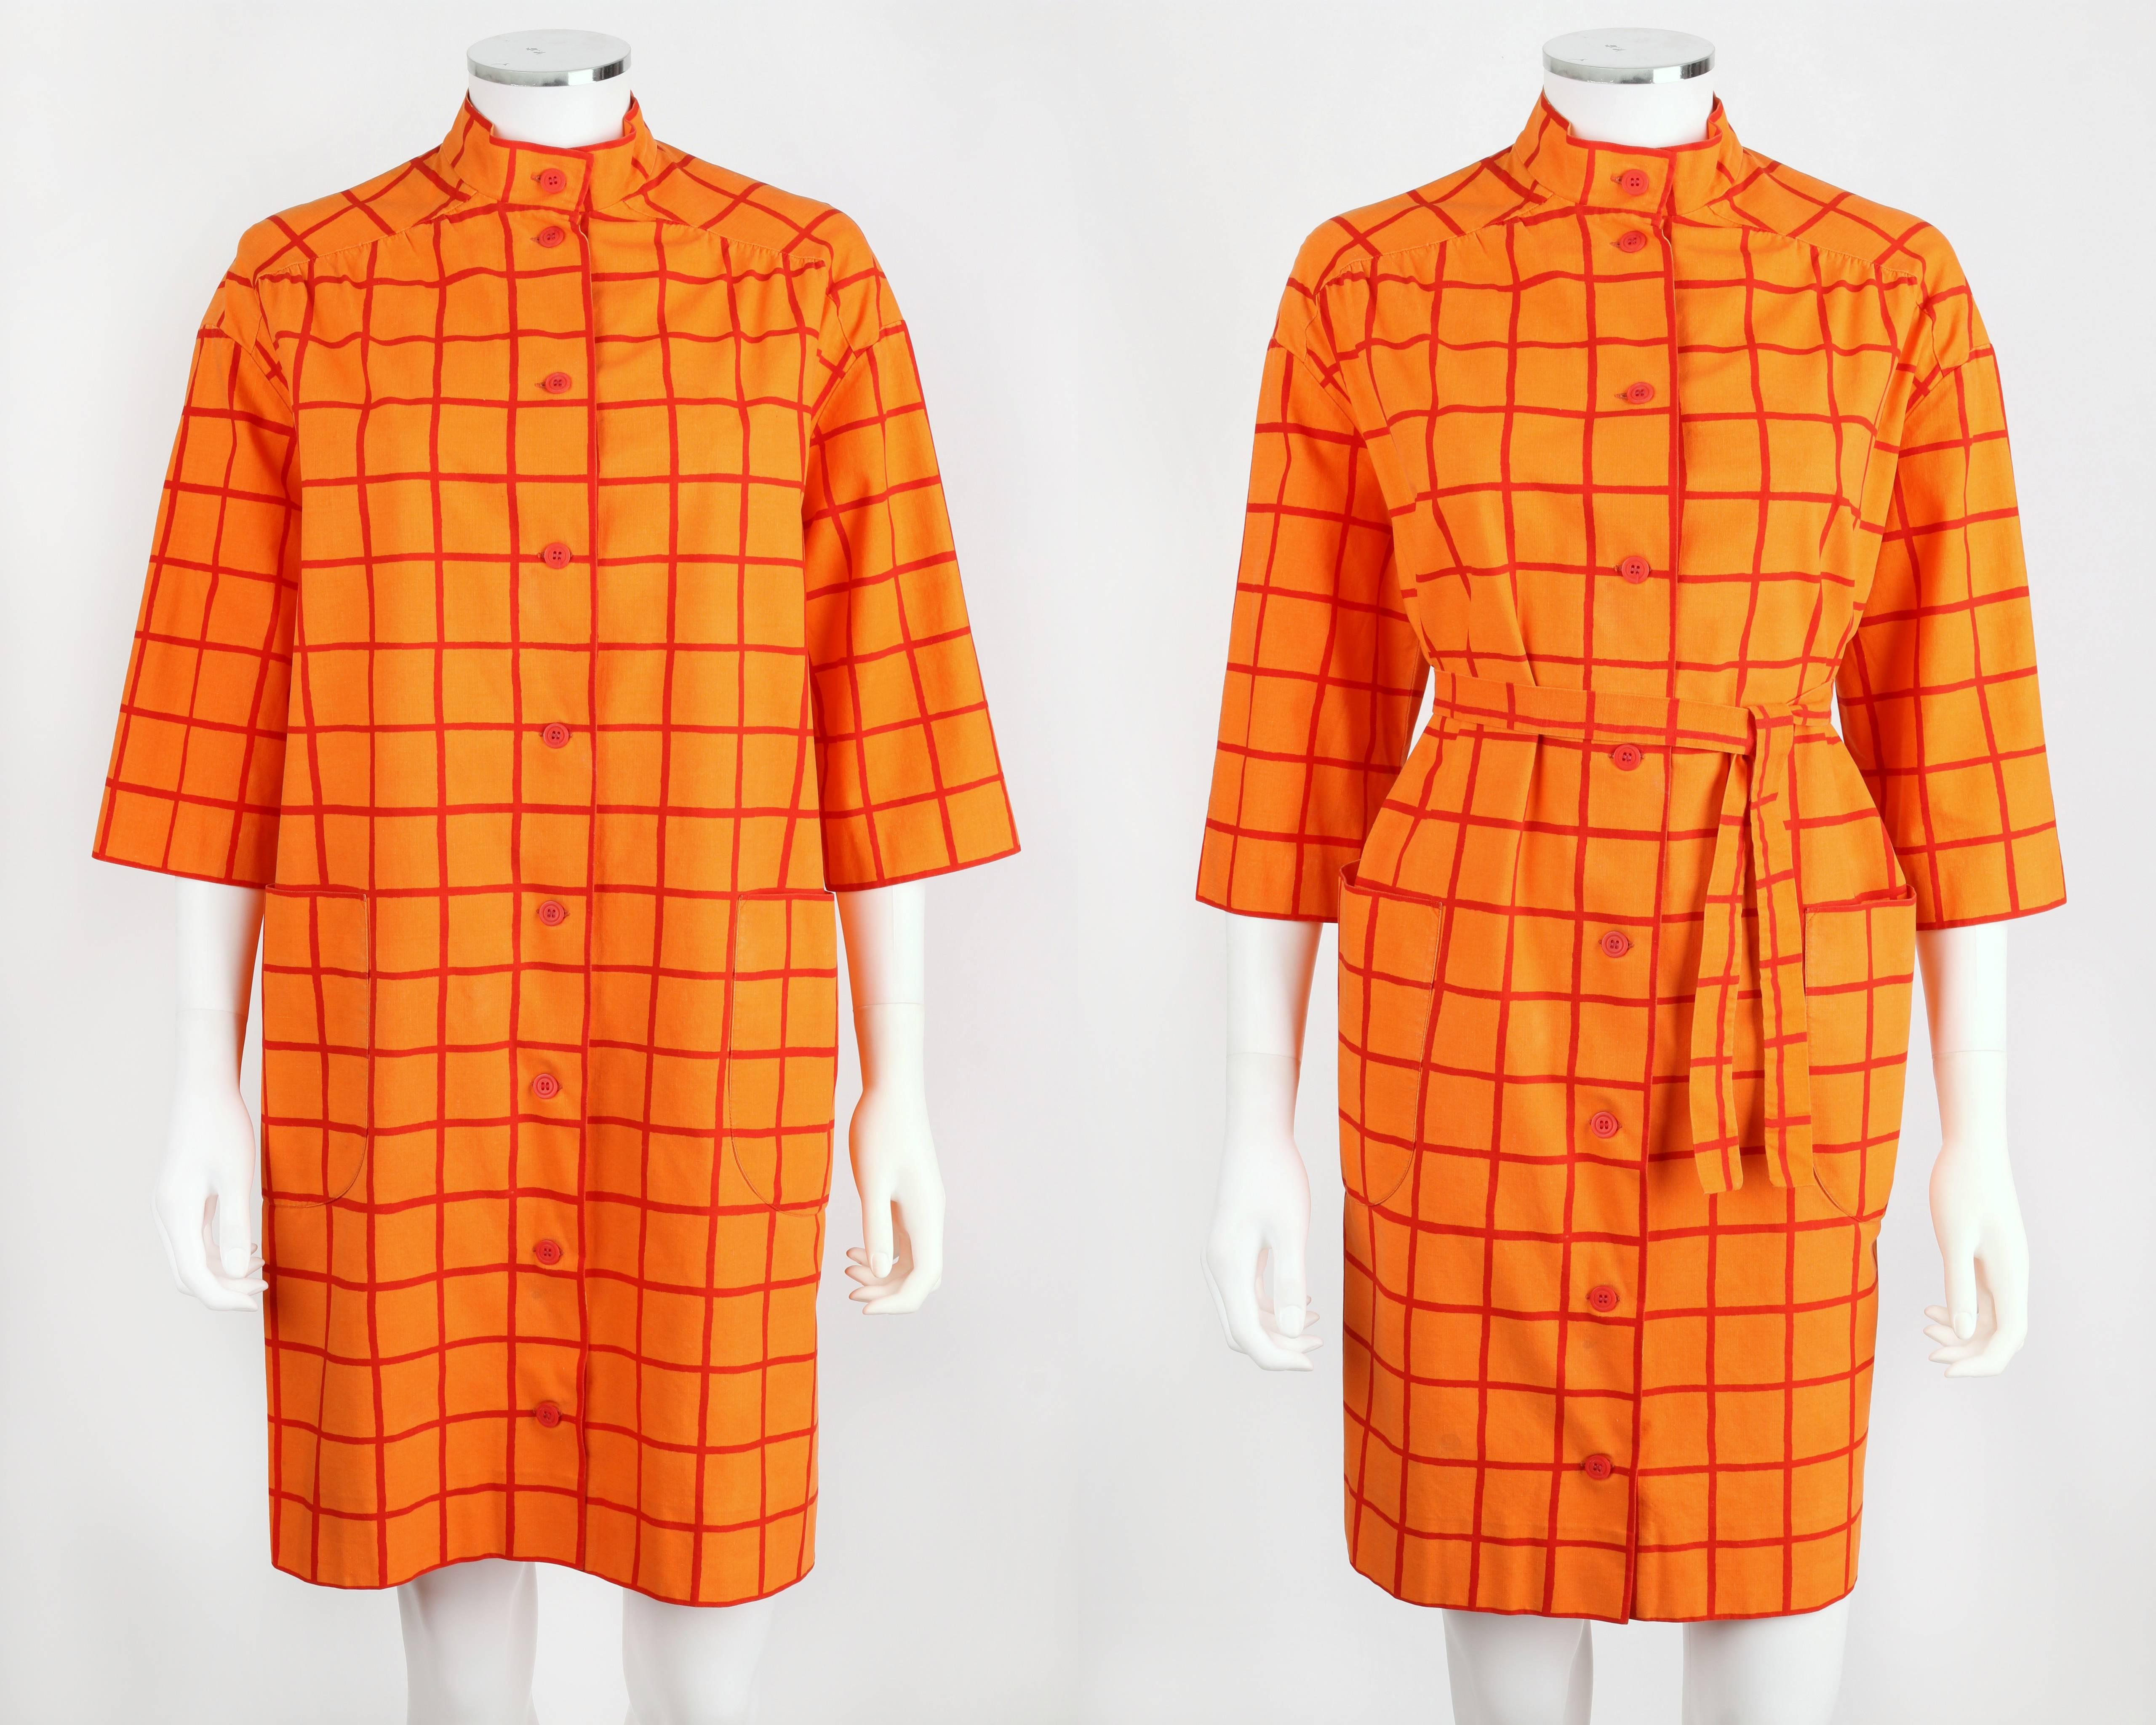 Vintage c.1960s Marimekko for Design Research orange and red window pane print cotton tent dress with tie waist belt. Mock neck. 3/4 length sleeves Two large patch pockets. Center front button closure. Unmarked Fabric Content: